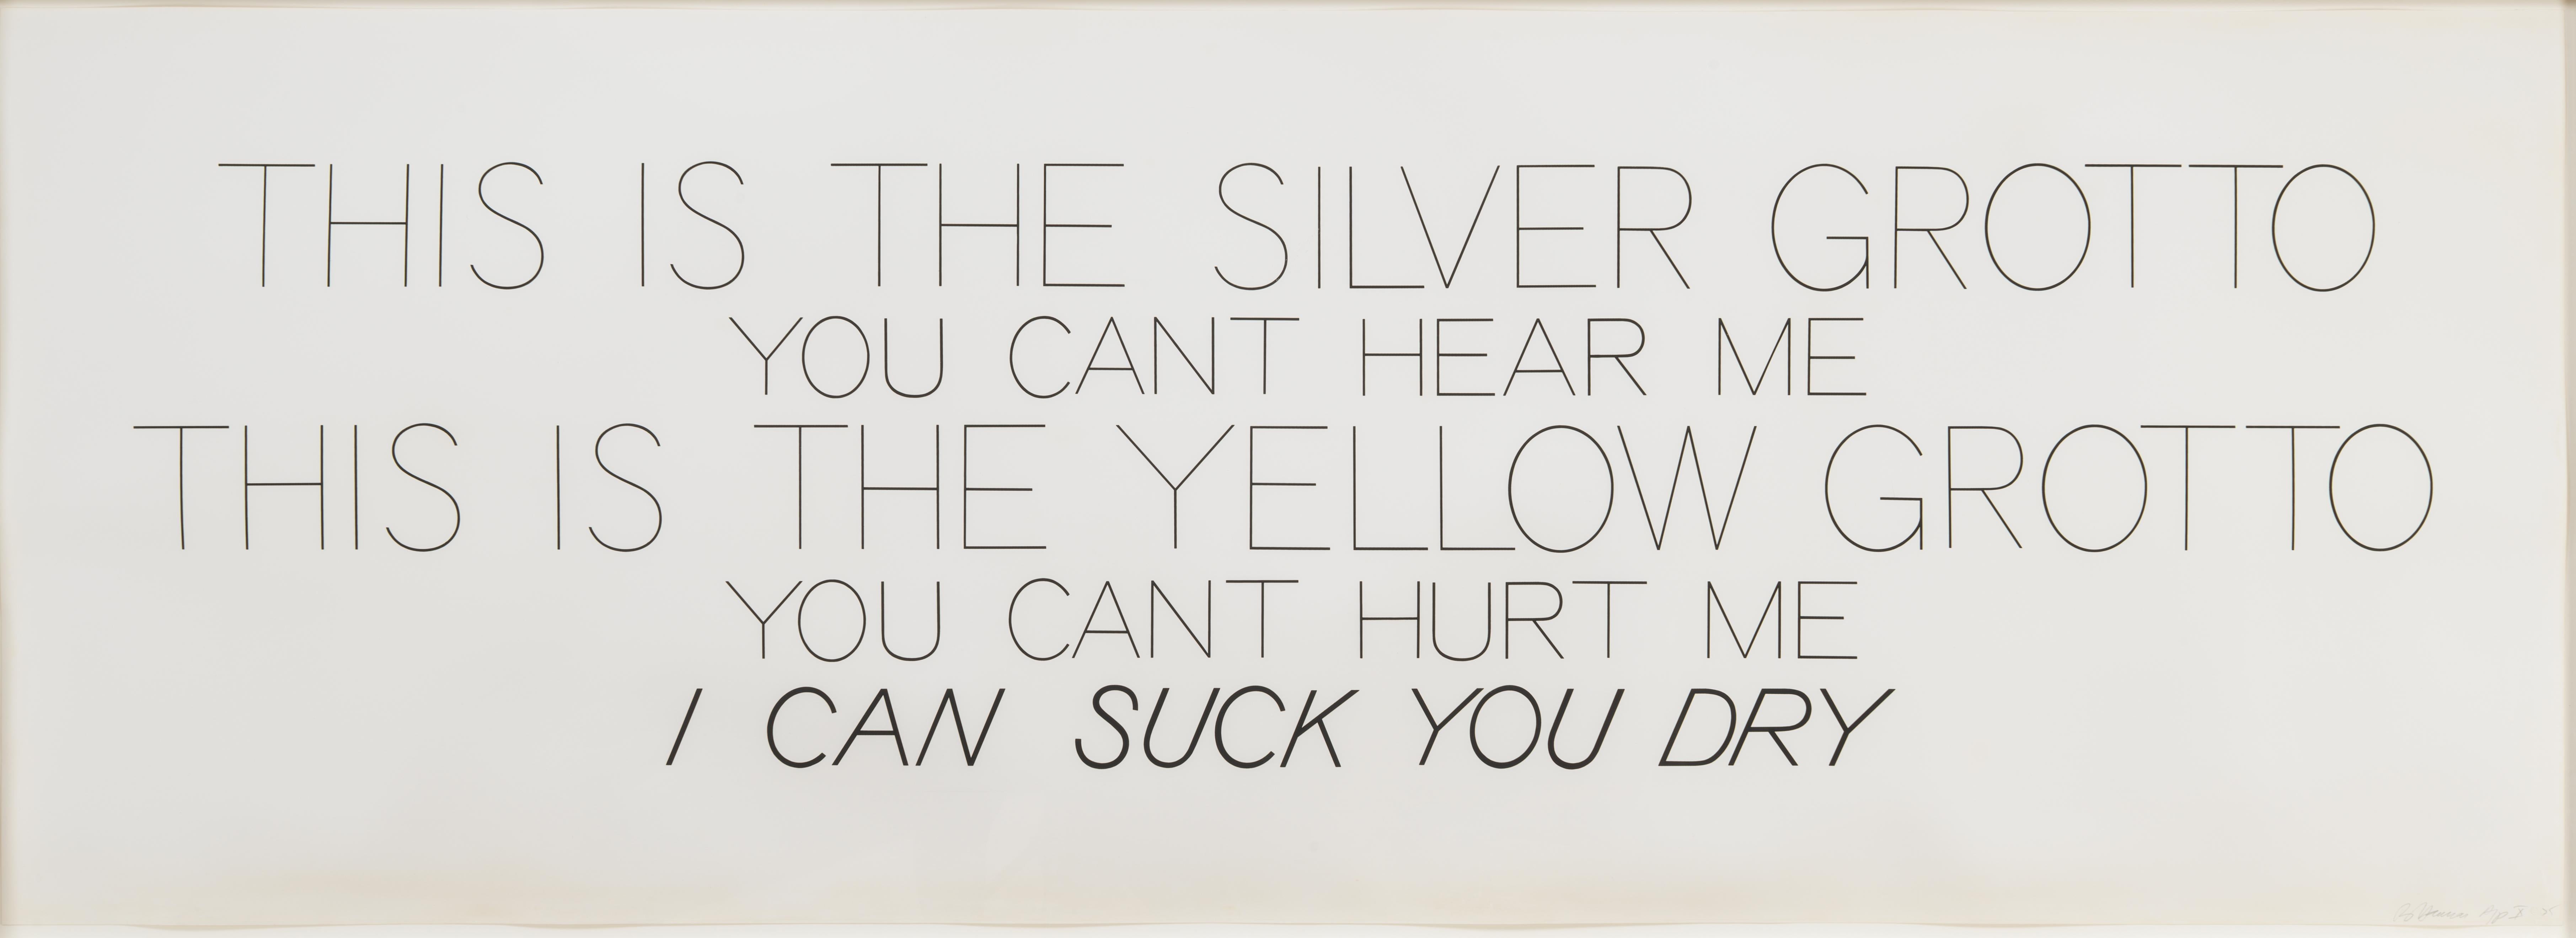 Silver Grotto/Yellow Grotto - Print by Bruce Nauman